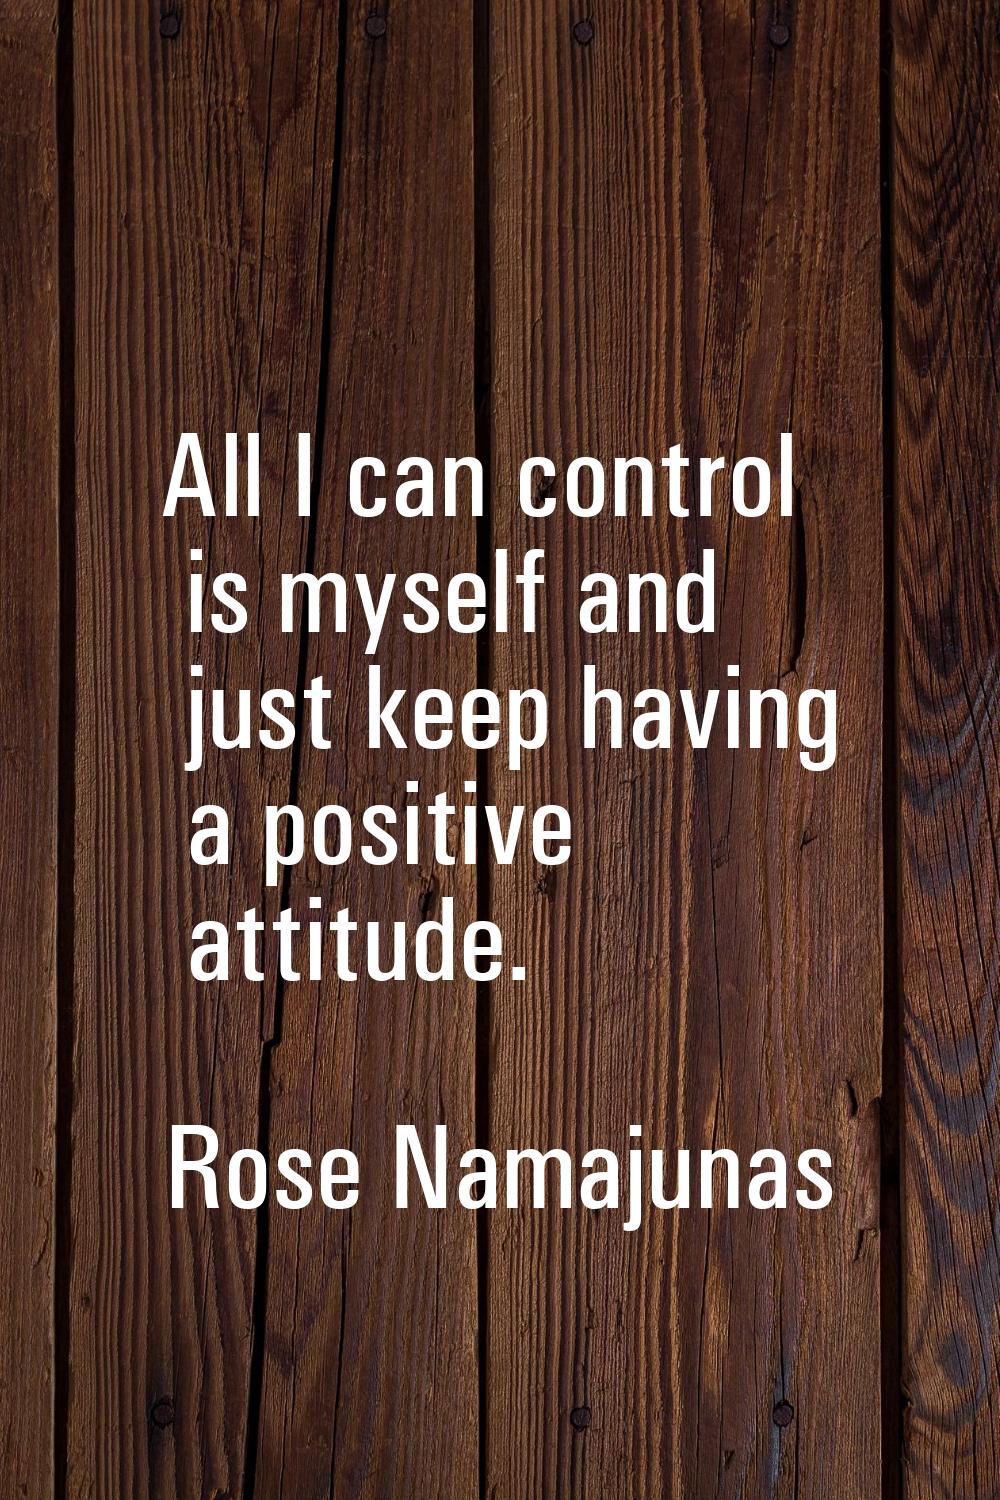 All I can control is myself and just keep having a positive attitude.